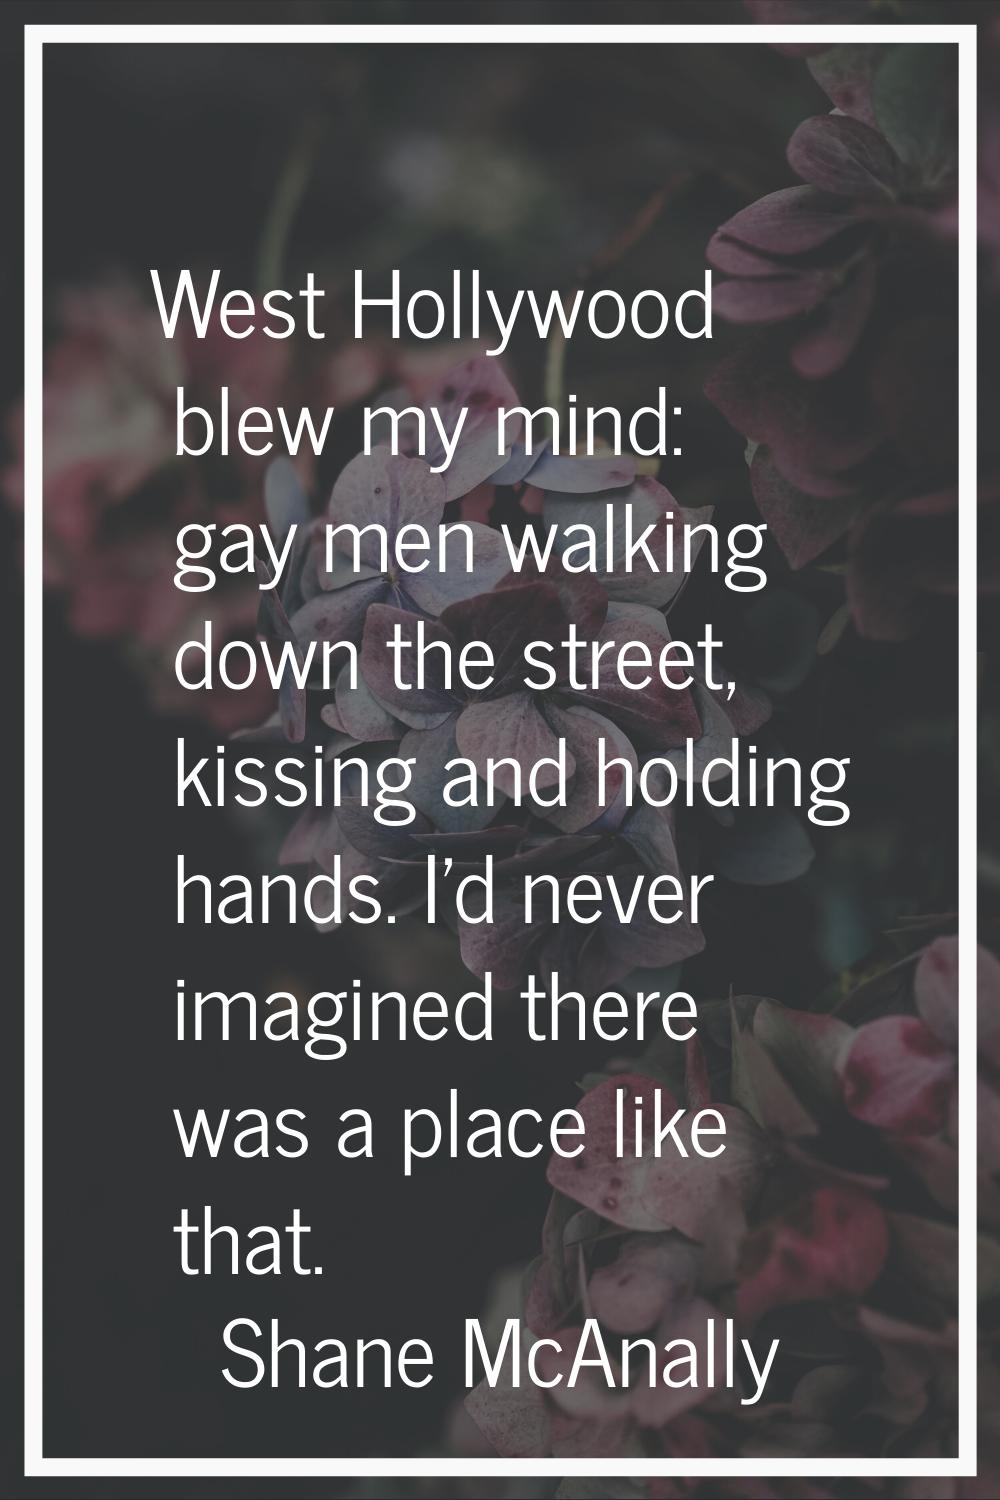 West Hollywood blew my mind: gay men walking down the street, kissing and holding hands. I'd never 